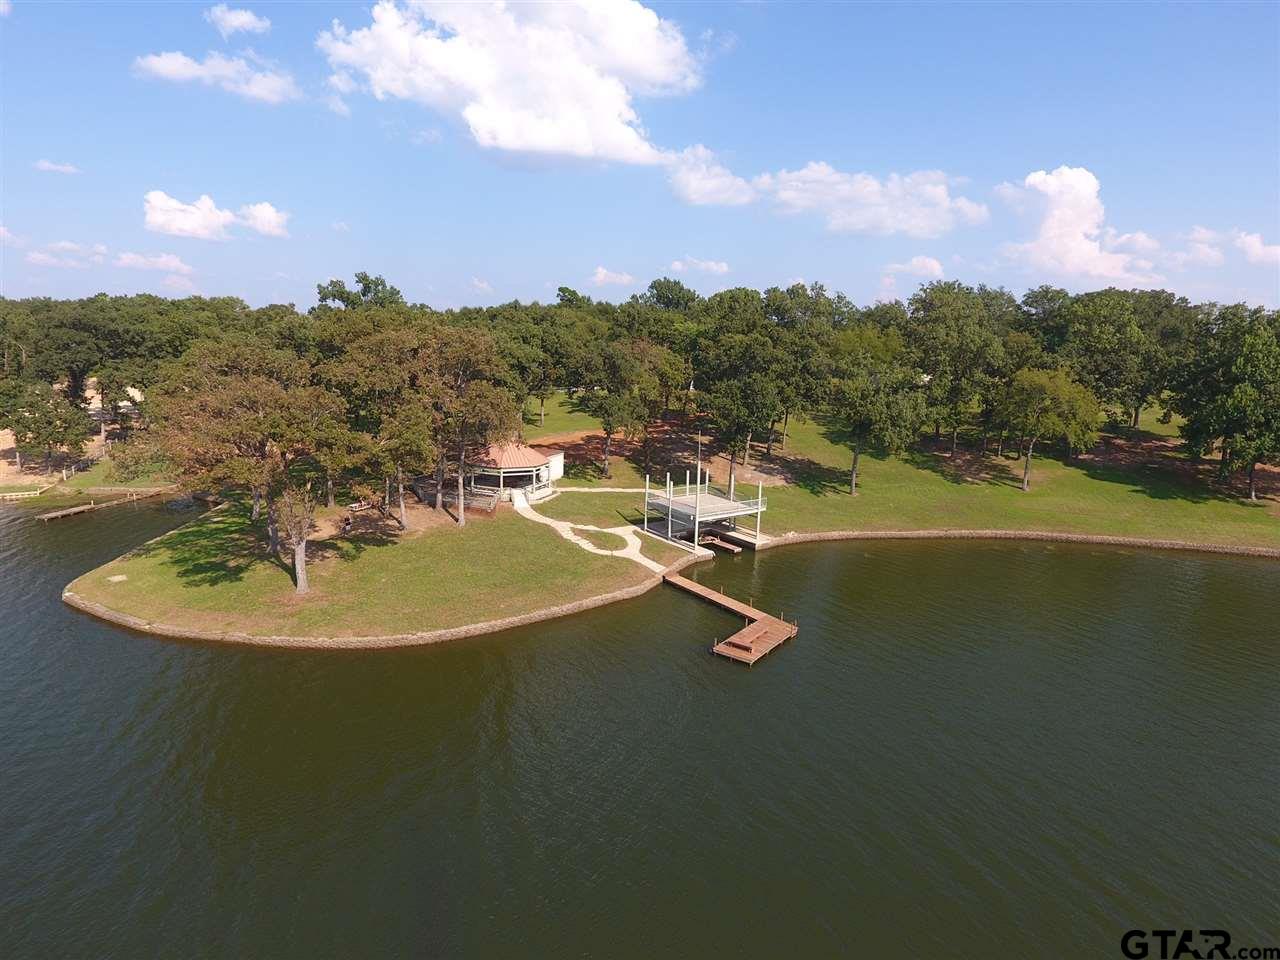 How do you find listings for lake properties in Texas?